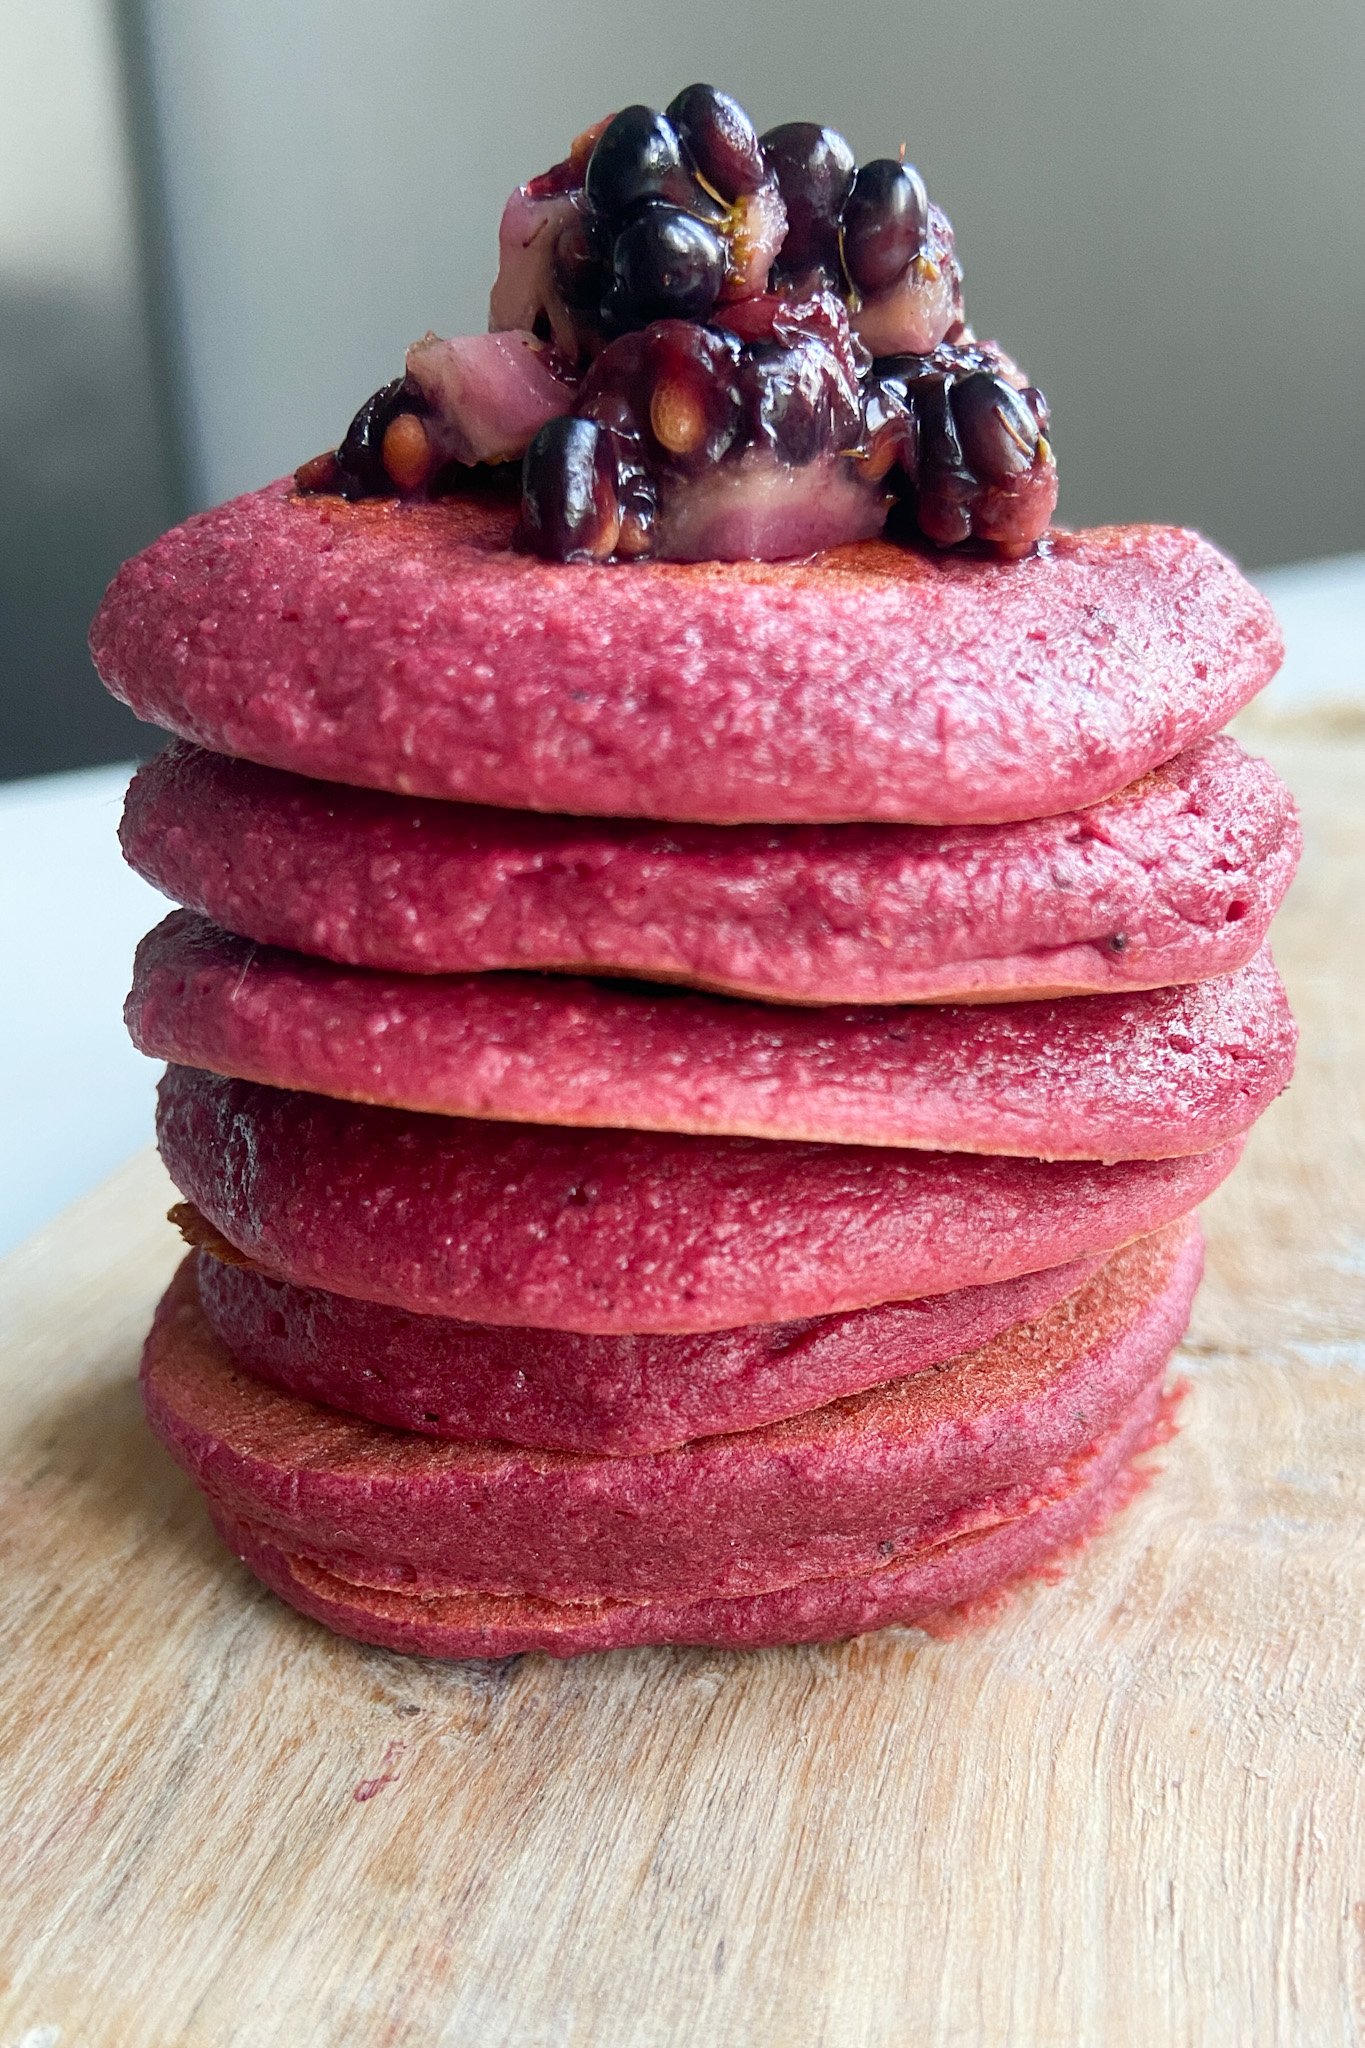 Beet banana pancakes topped with crushed blackberries